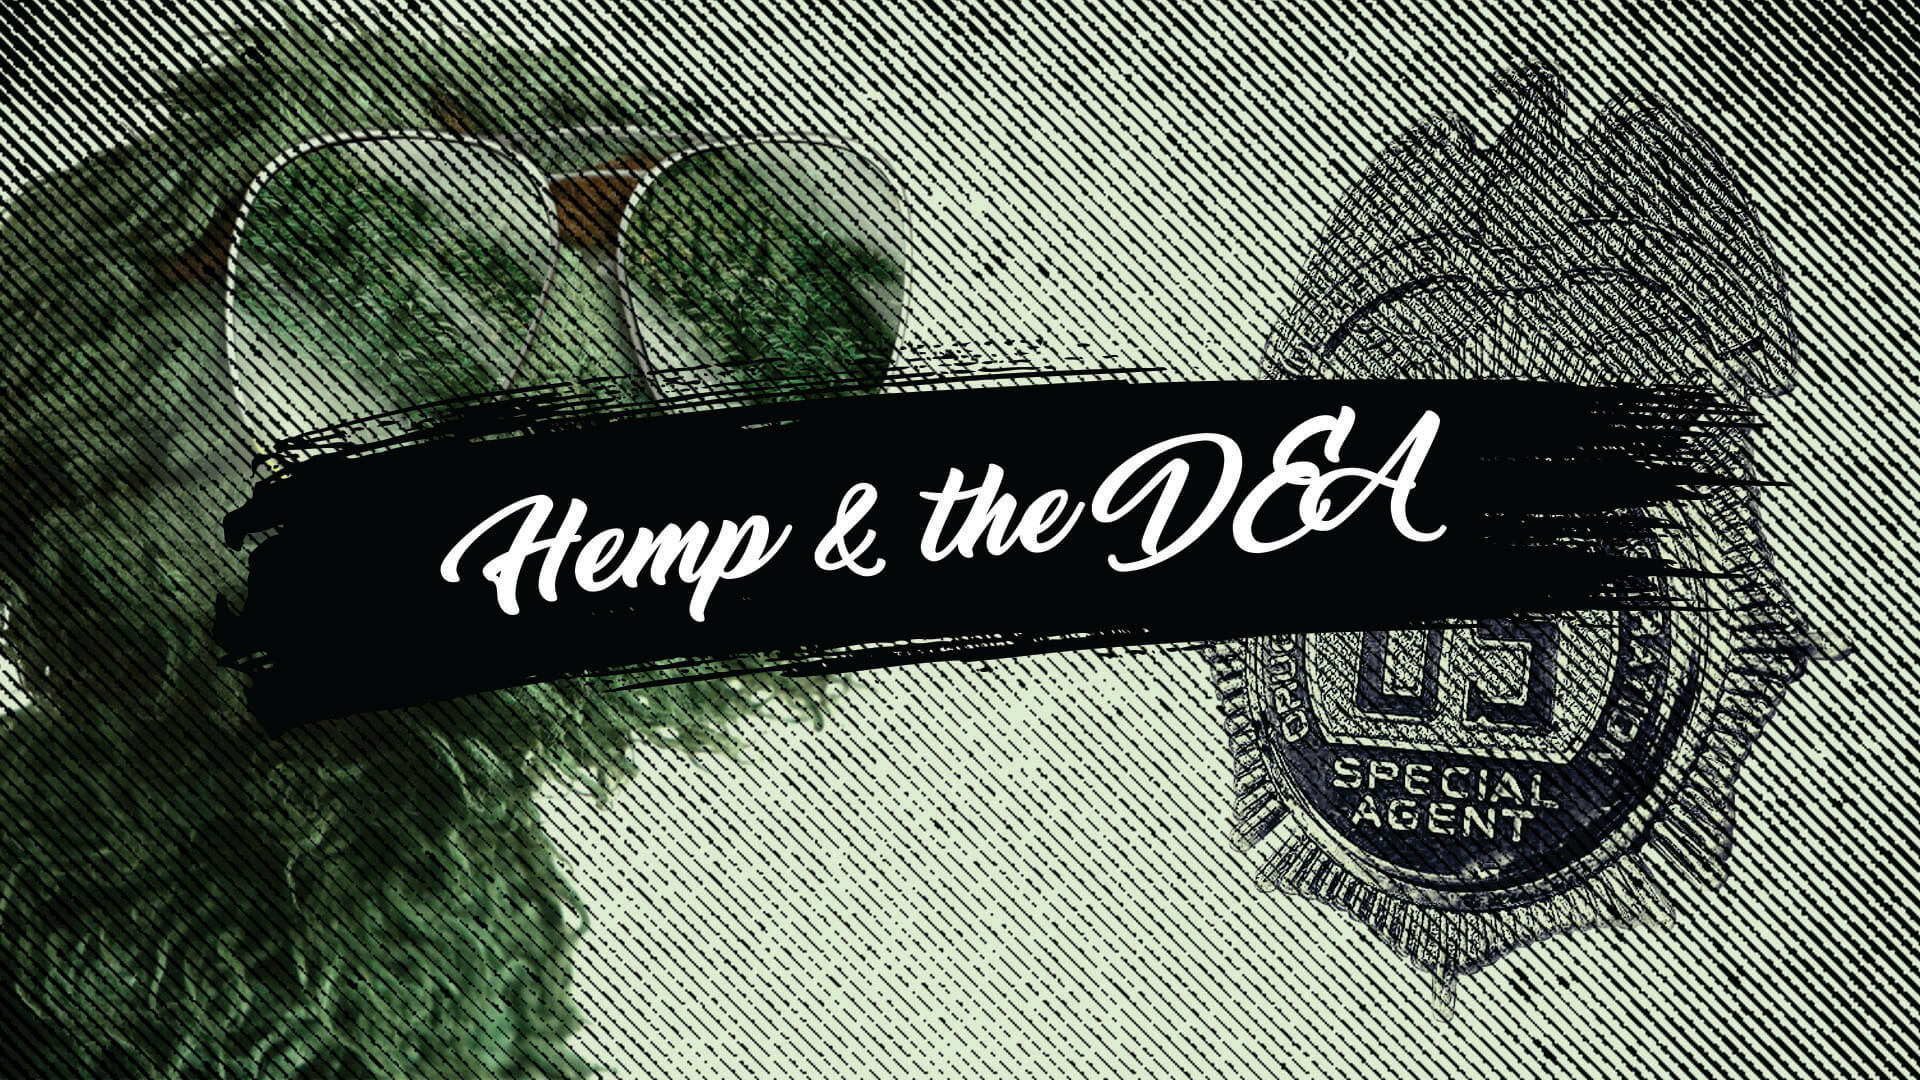 Here's what you need to know about the DEA and hemp